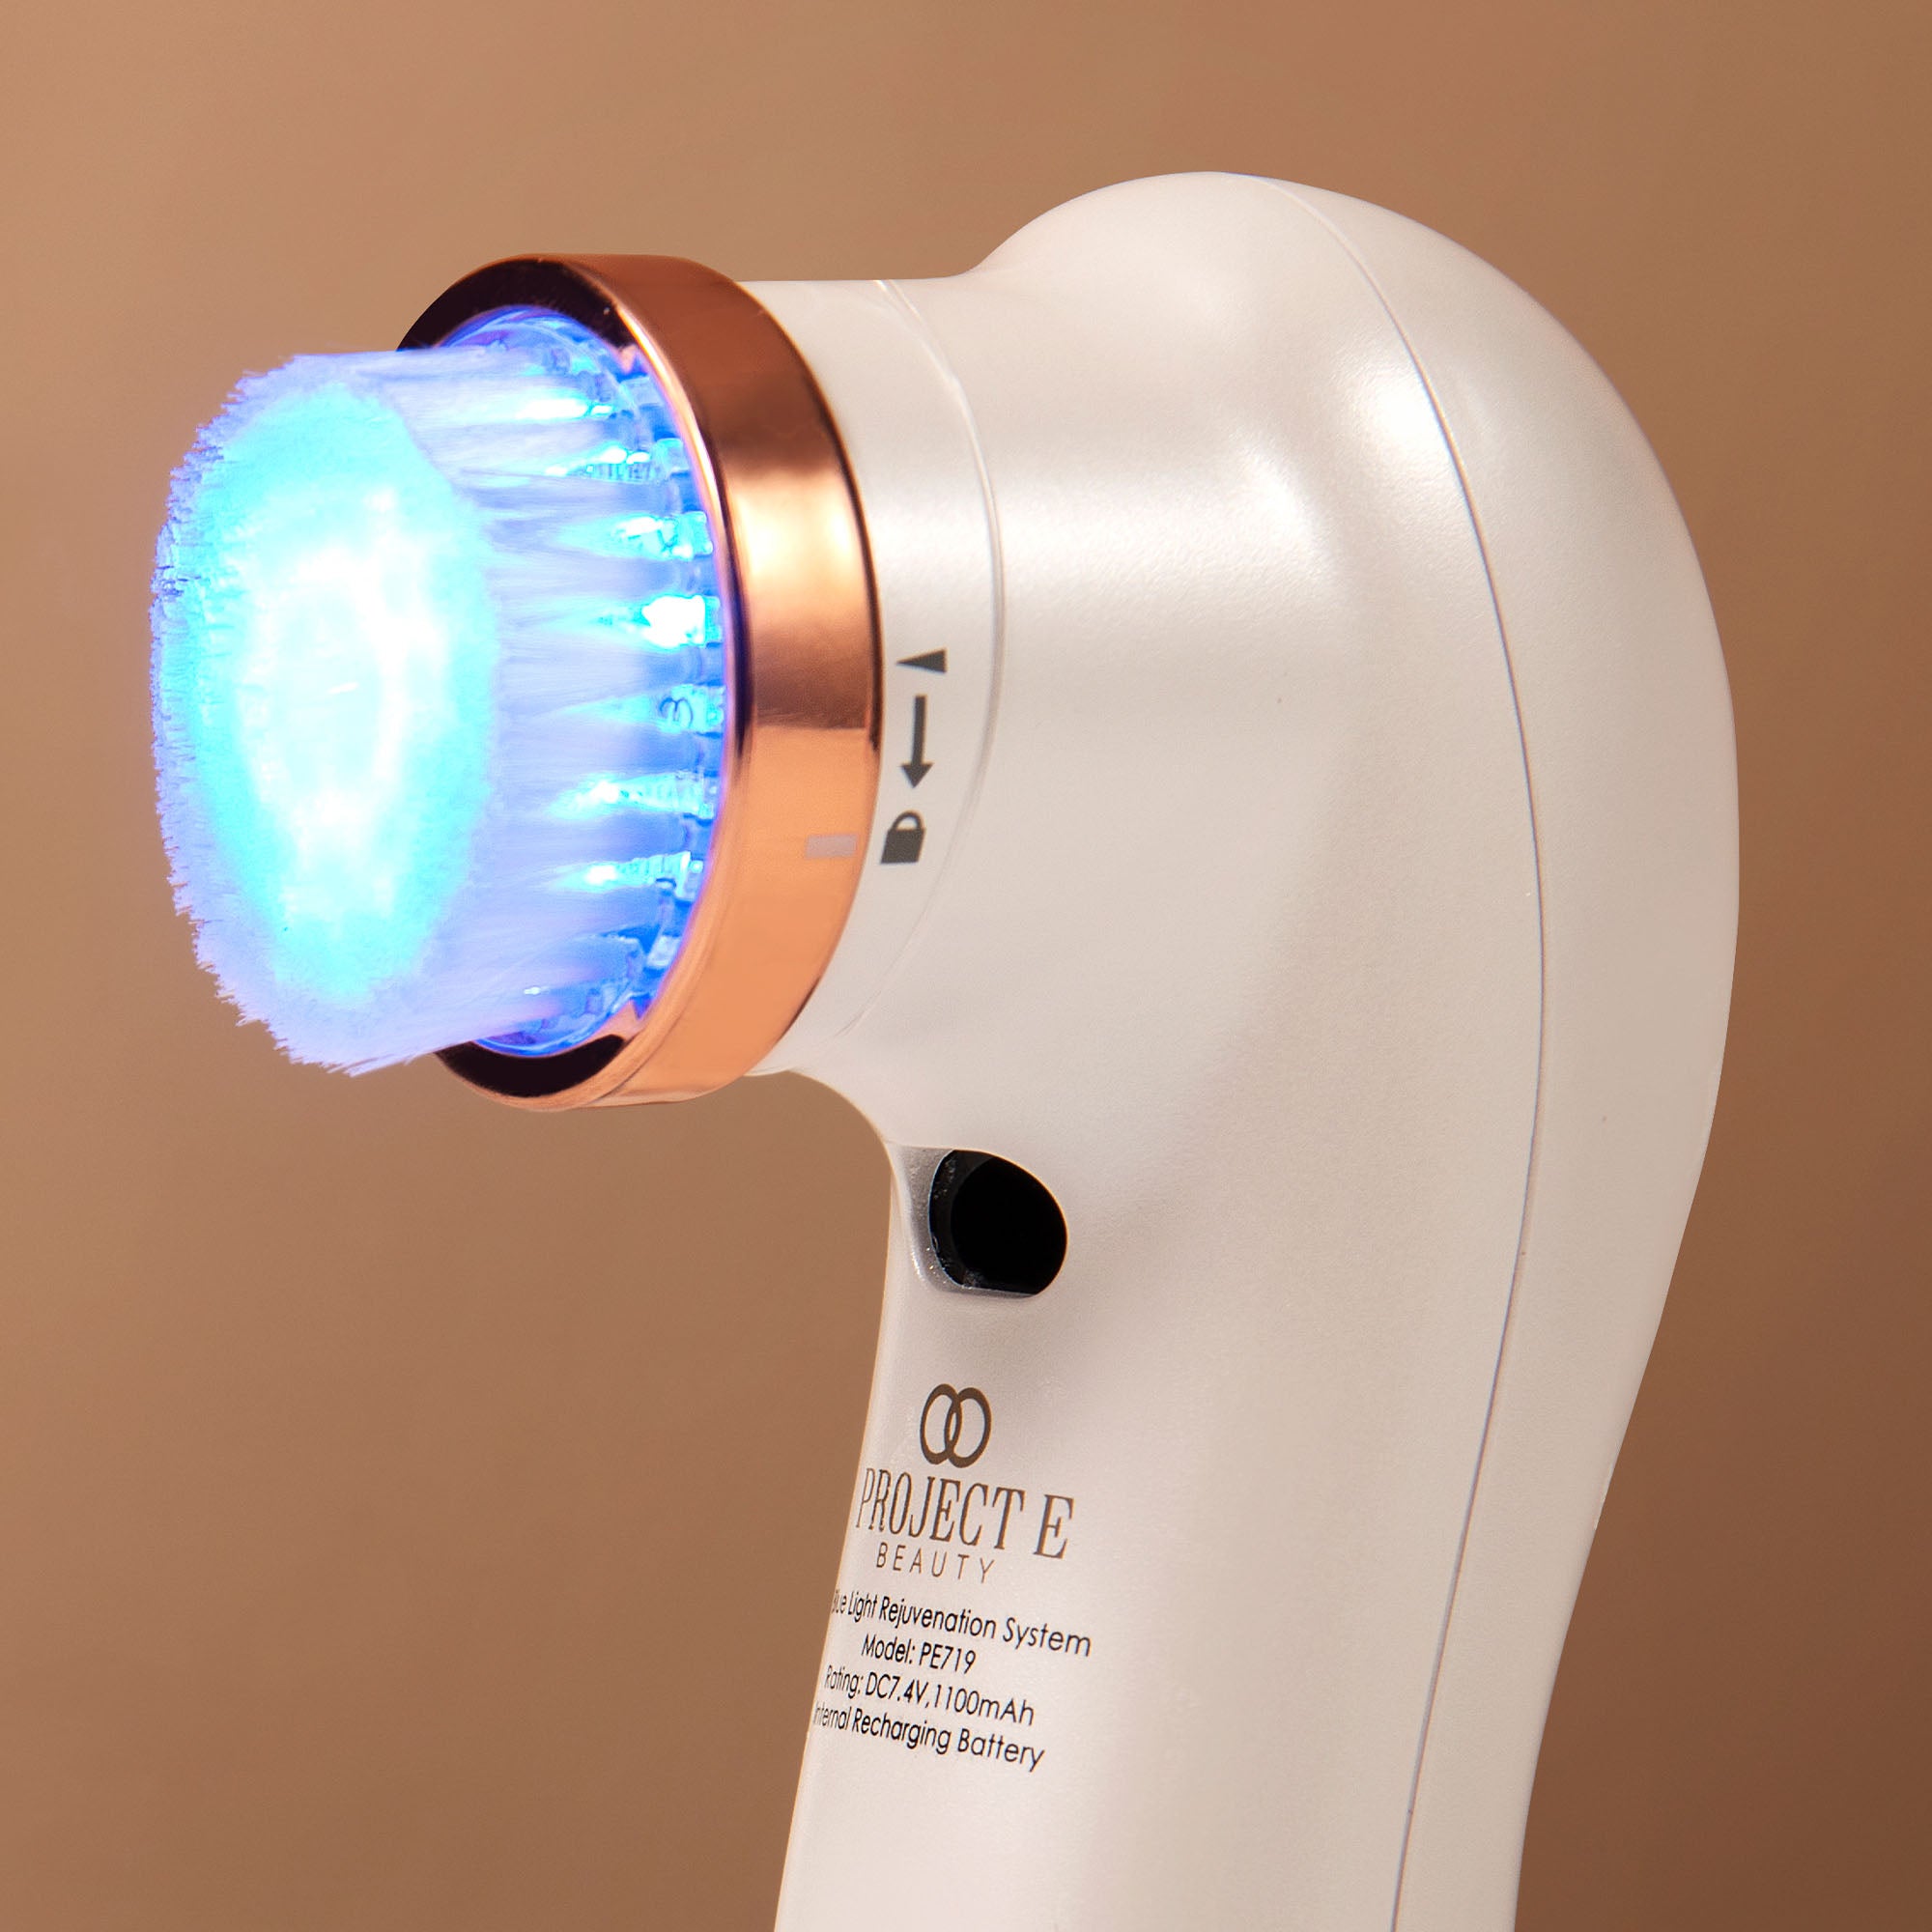 LumaBlue | LED Light Therapy Cleansing Brush - Project E Beauty